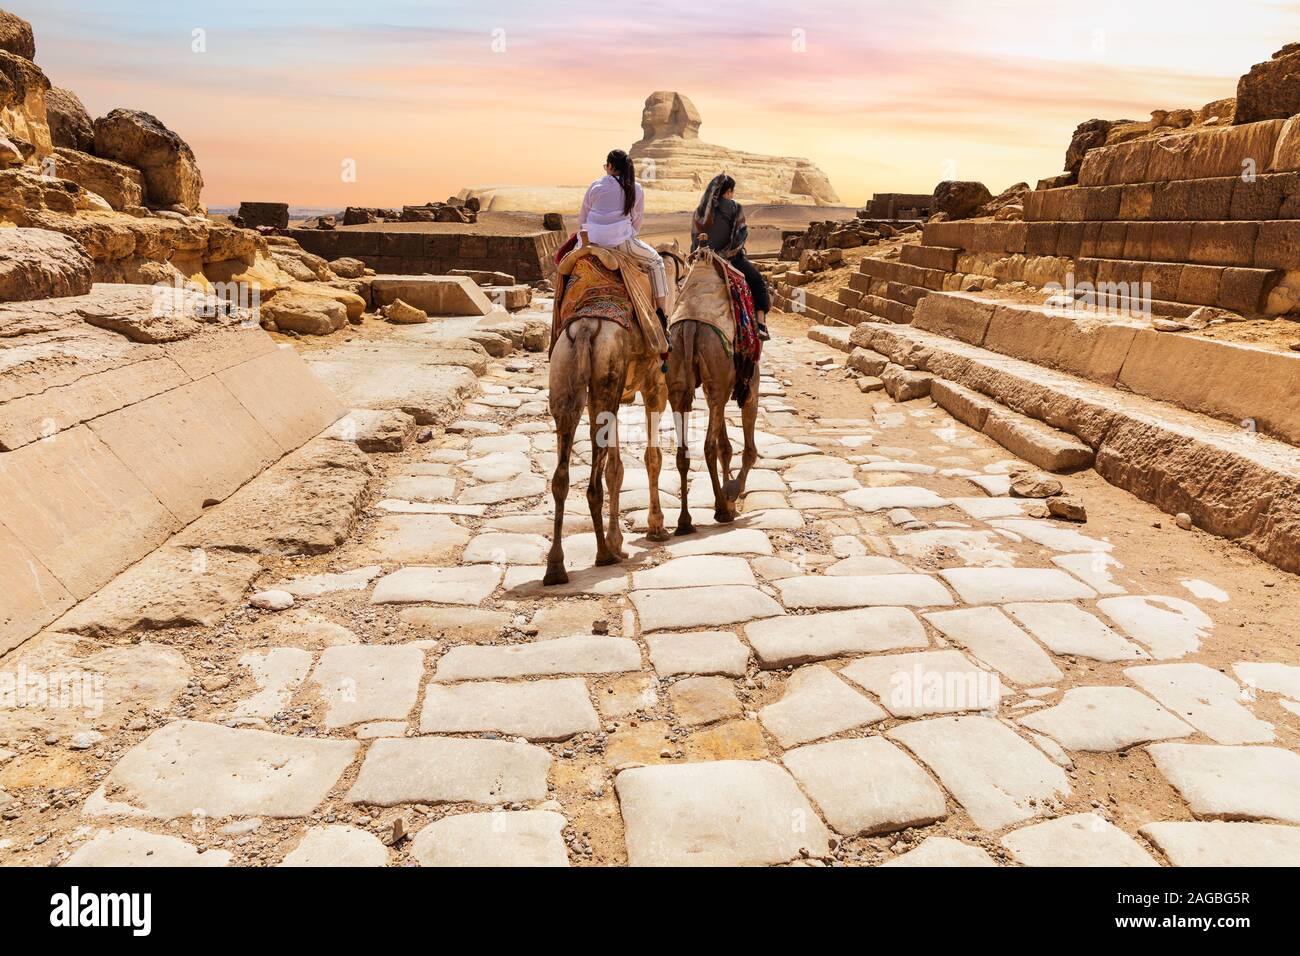 Tourists on camels in the temple of Giza near the Great Sphinx, Egypt Stock Photo